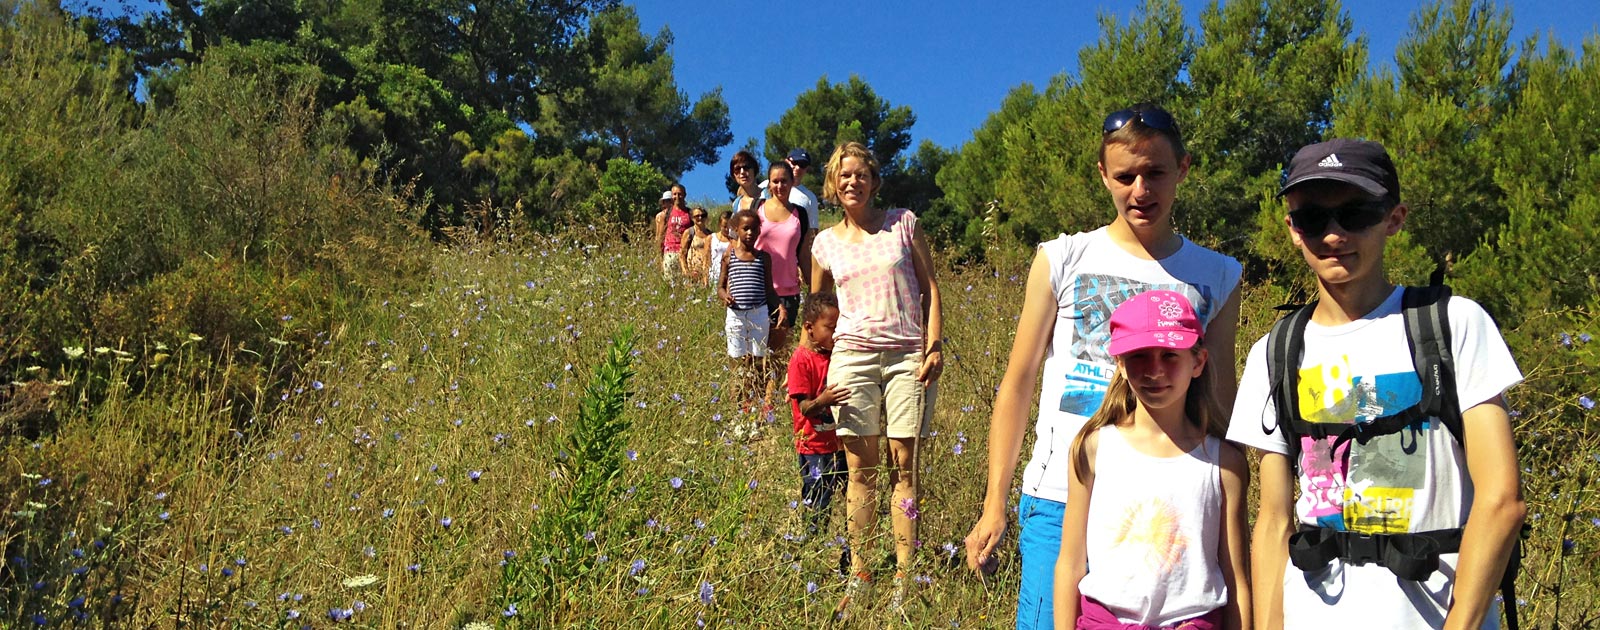 hiking in provence